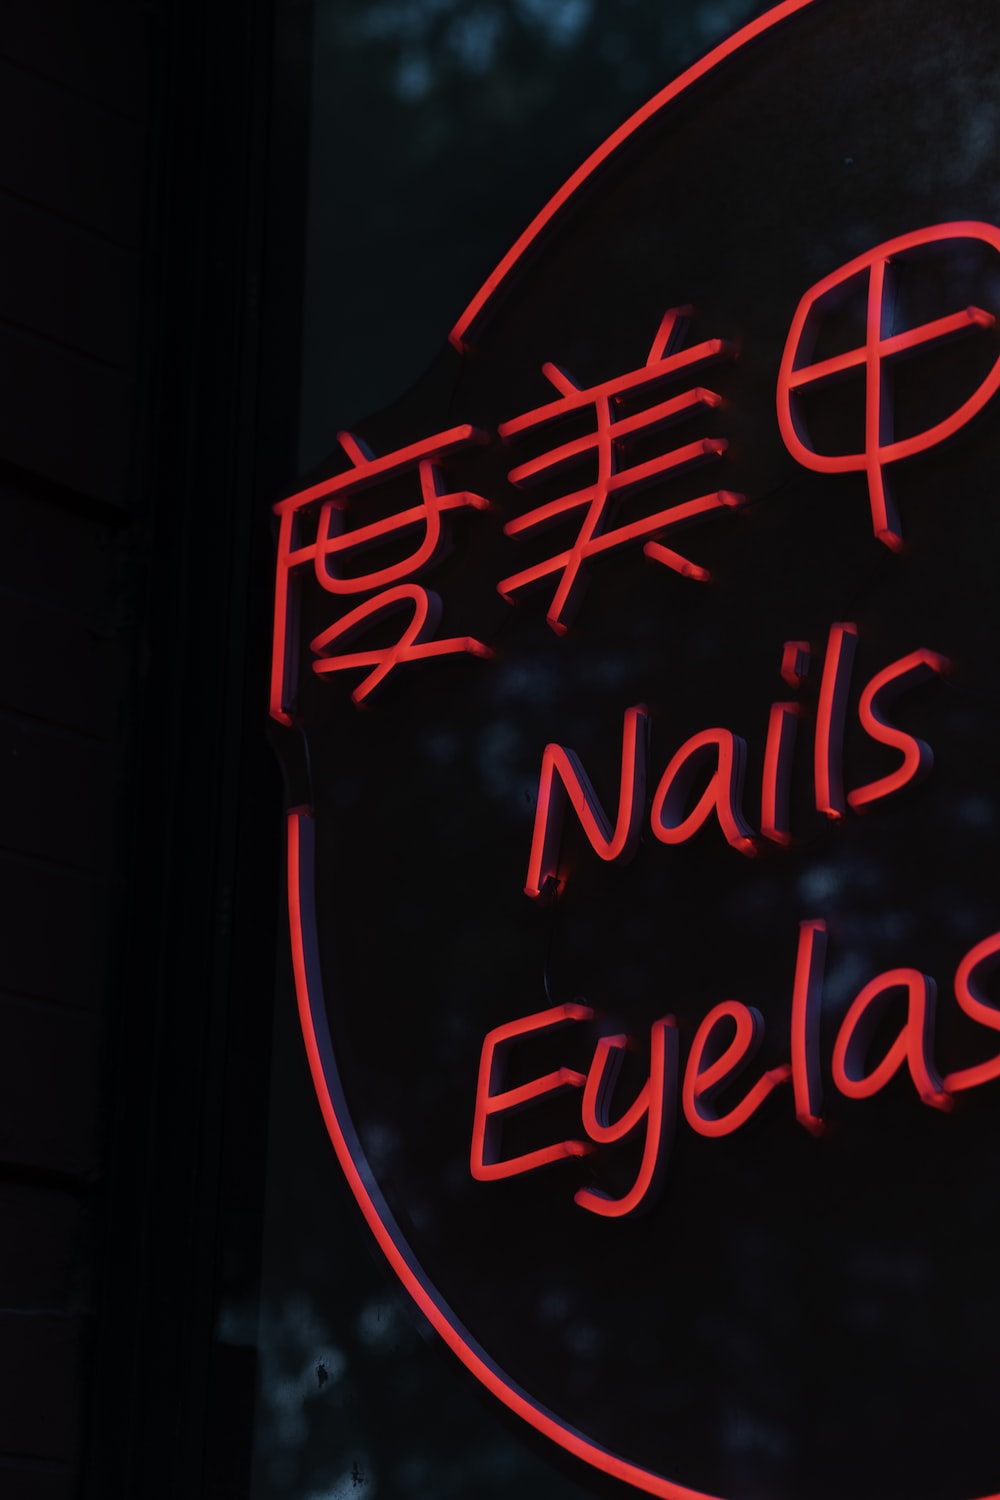 A neon sign that says nails and eyelashes photo